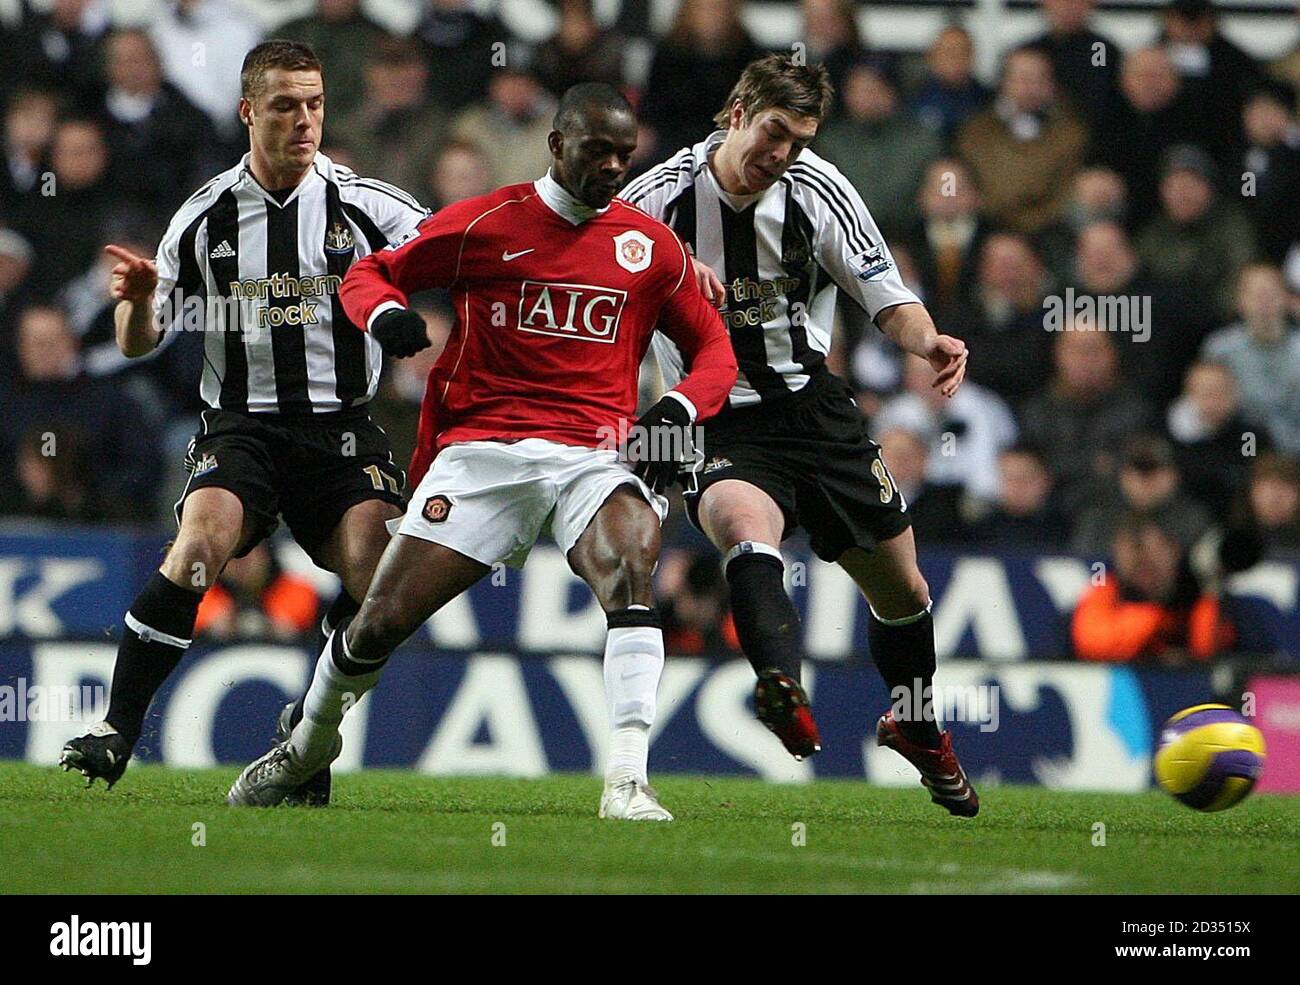 Newcastle United's Scott Parker (left) and Paul Huntington battle with Manchester United's Louis Saha (centre) during the Barclays Premiership match at St James Park, Newcastle. Stock Photo